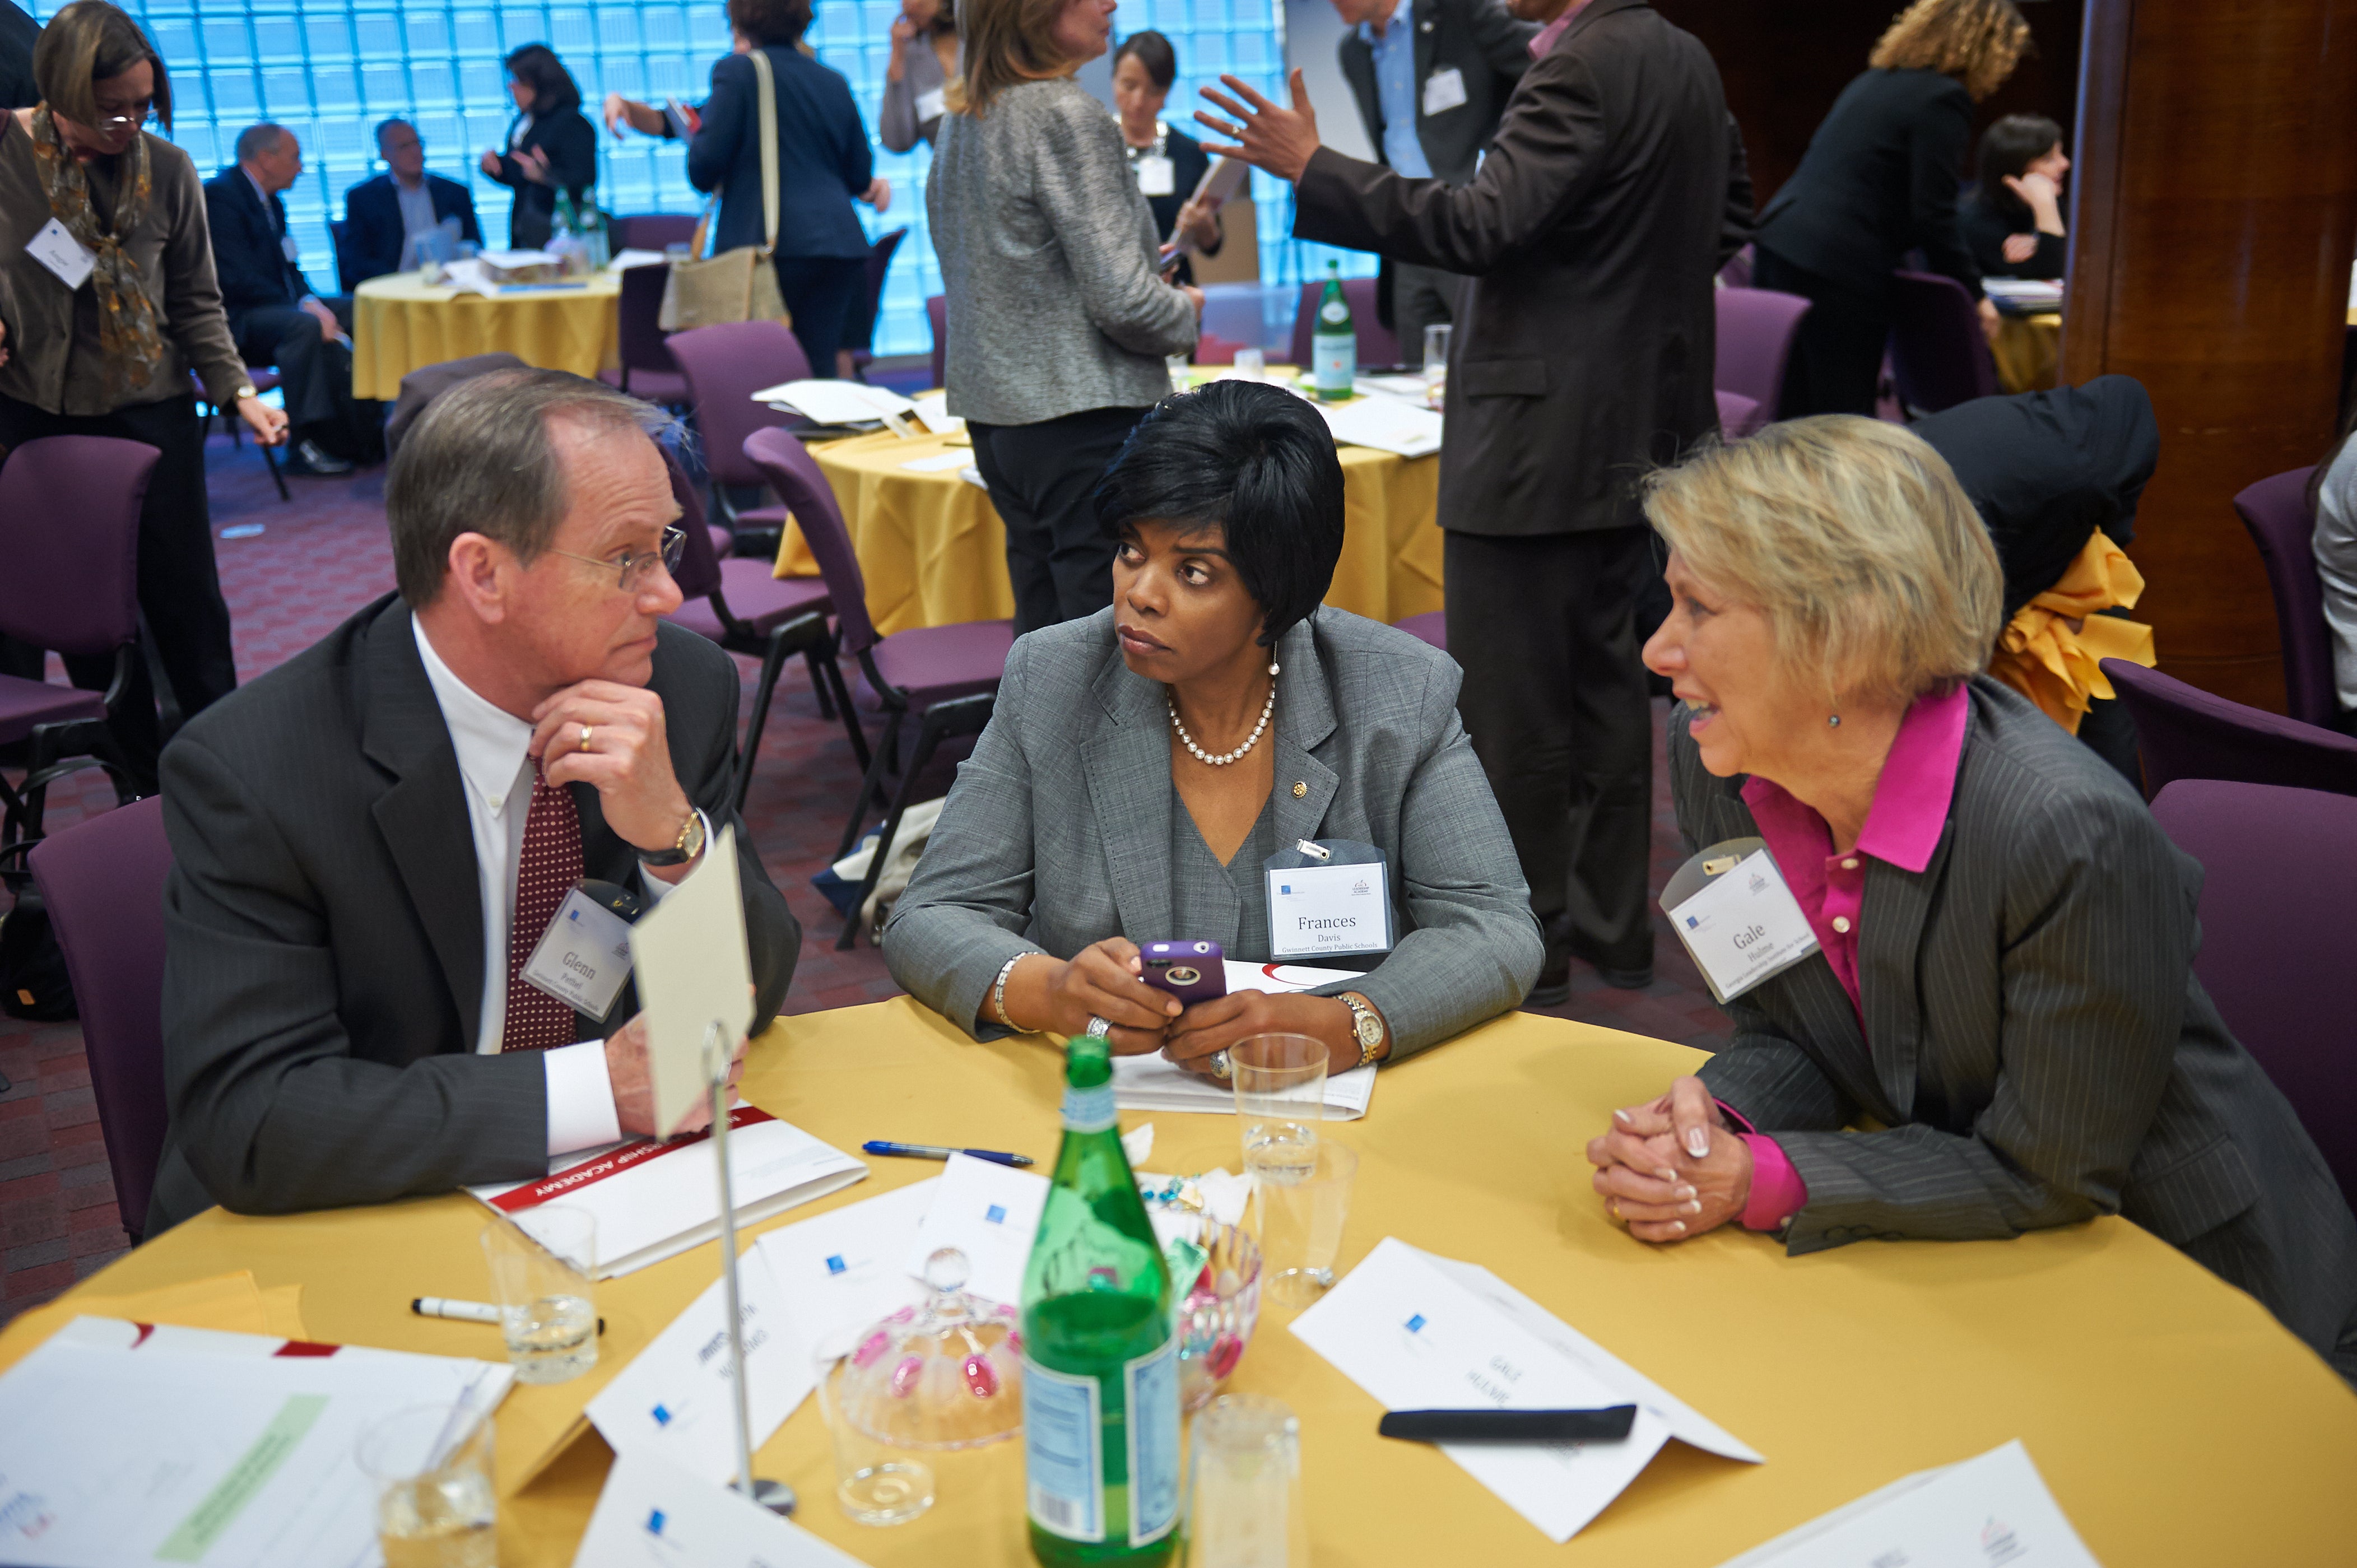 Three education leaders sit at a table in discussion during a conference.